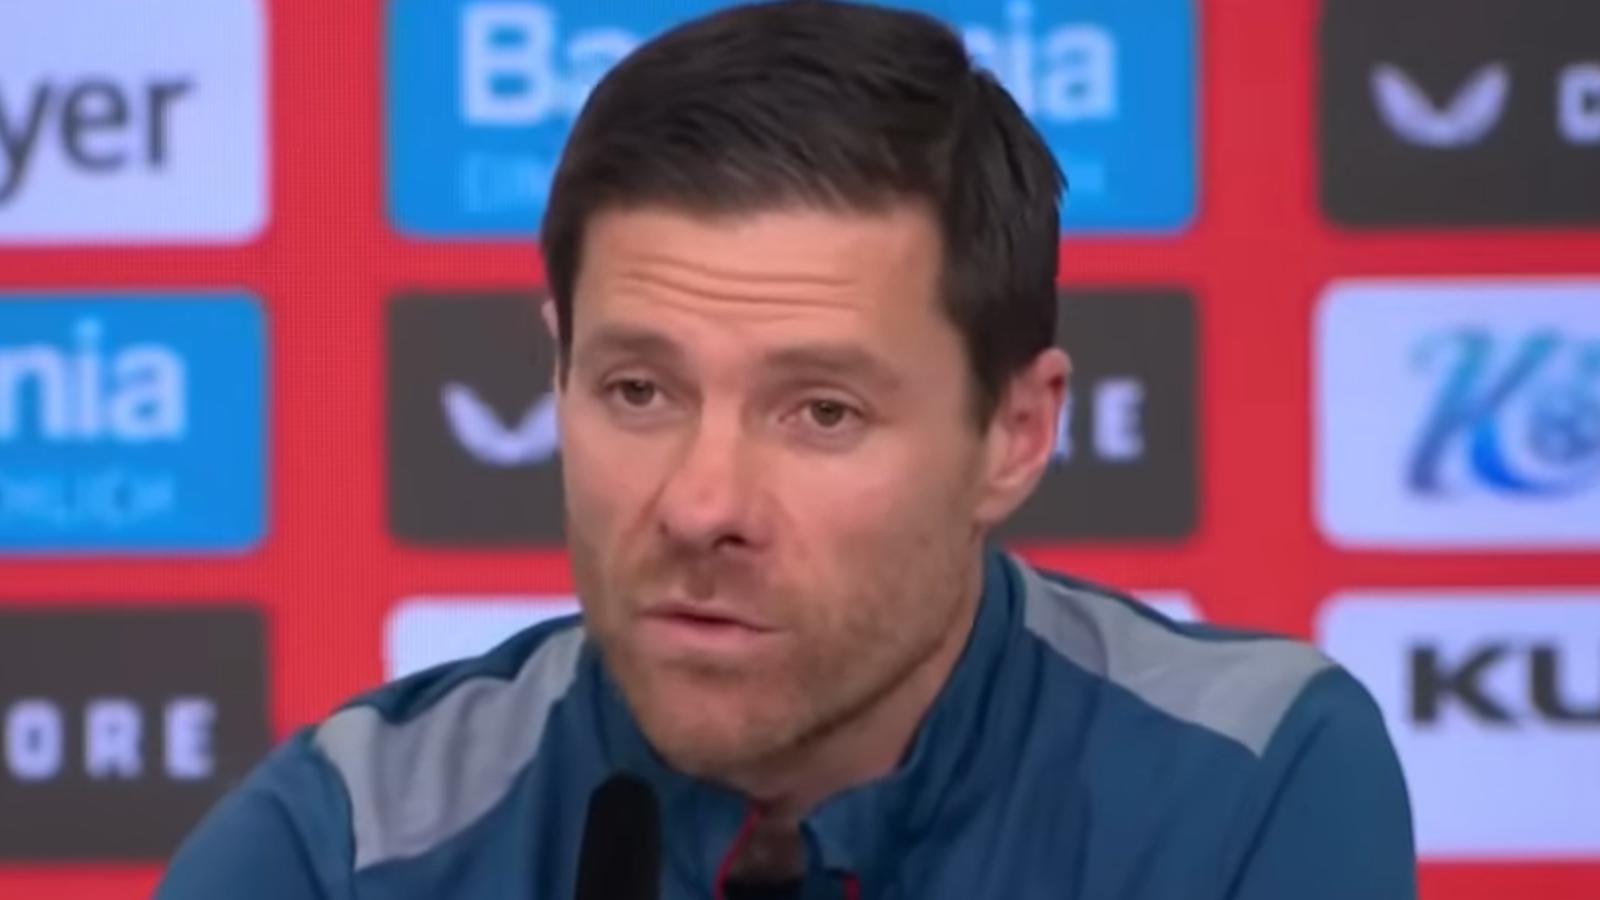 Xabi Alonso has been linked with the Liverpool job